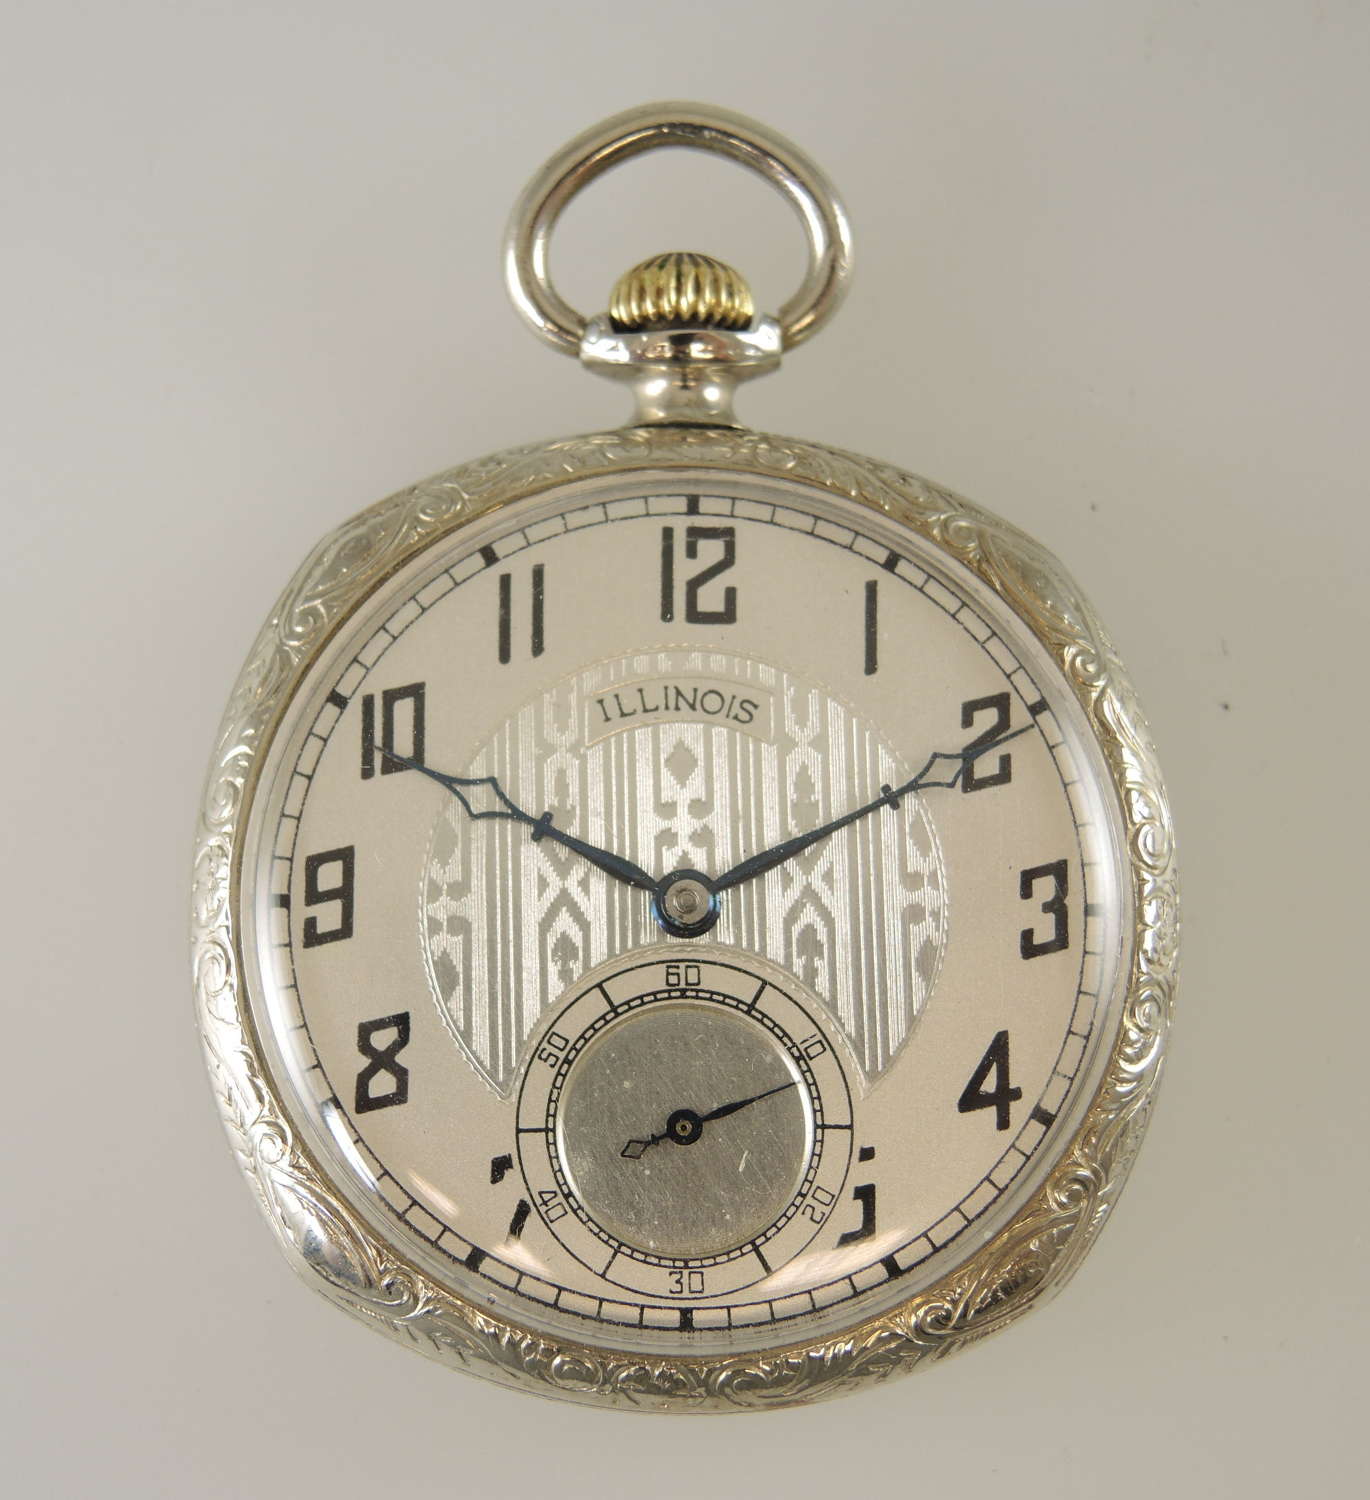 Unusual Square shaped Illinois Penn Special pocket watch c1925